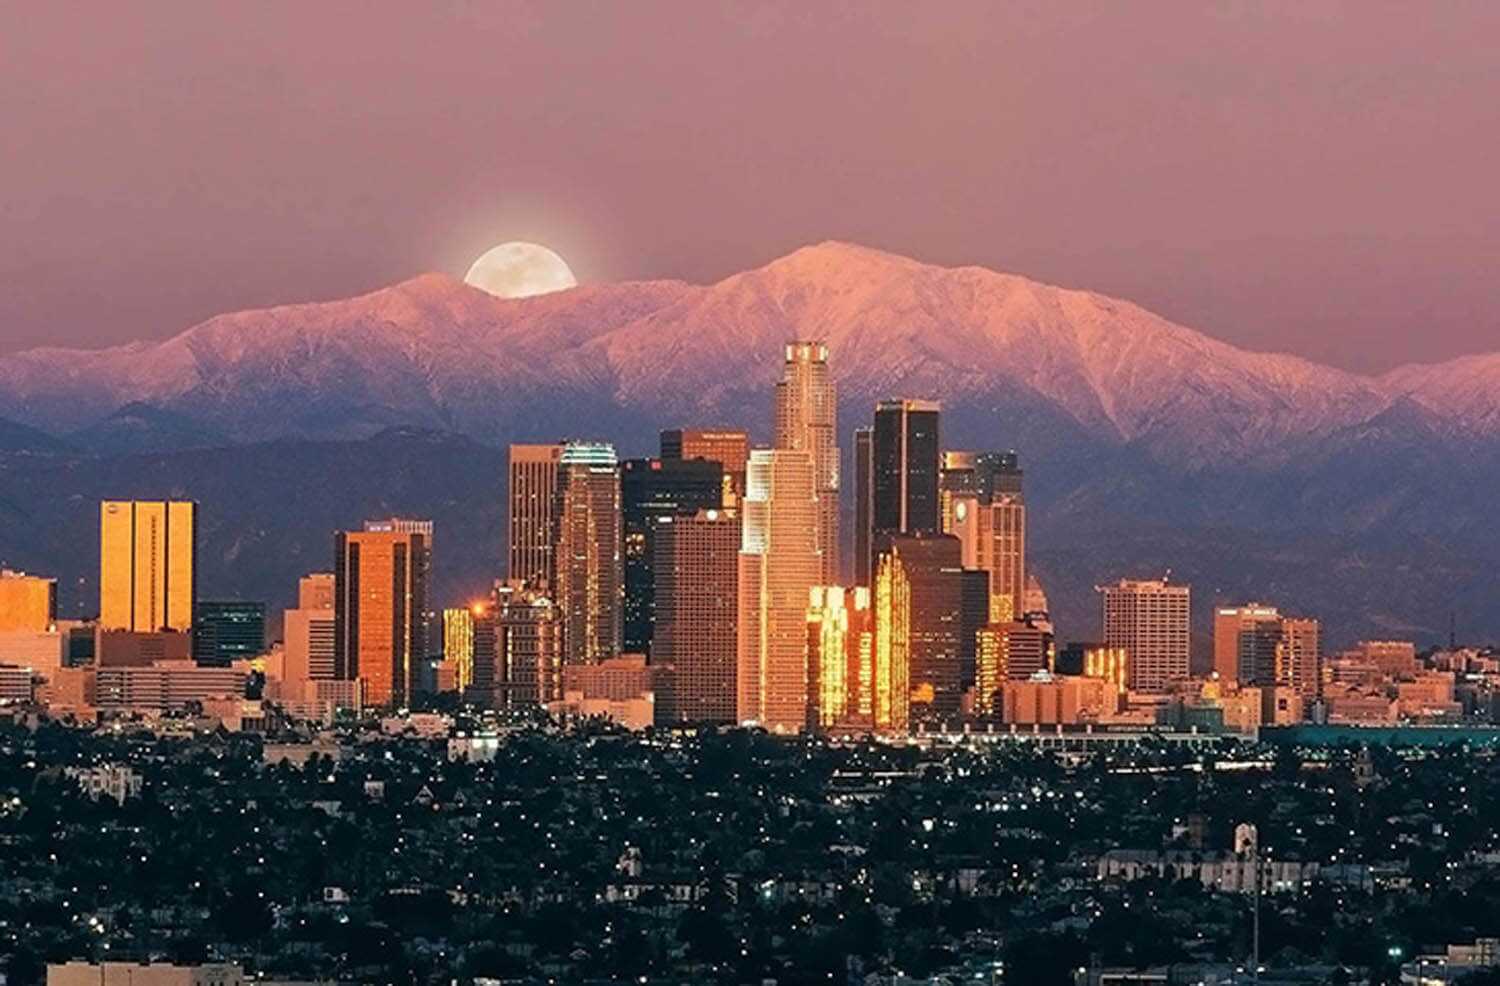 Los Angeles limo tours: Downtown Los Angeles at Sunset